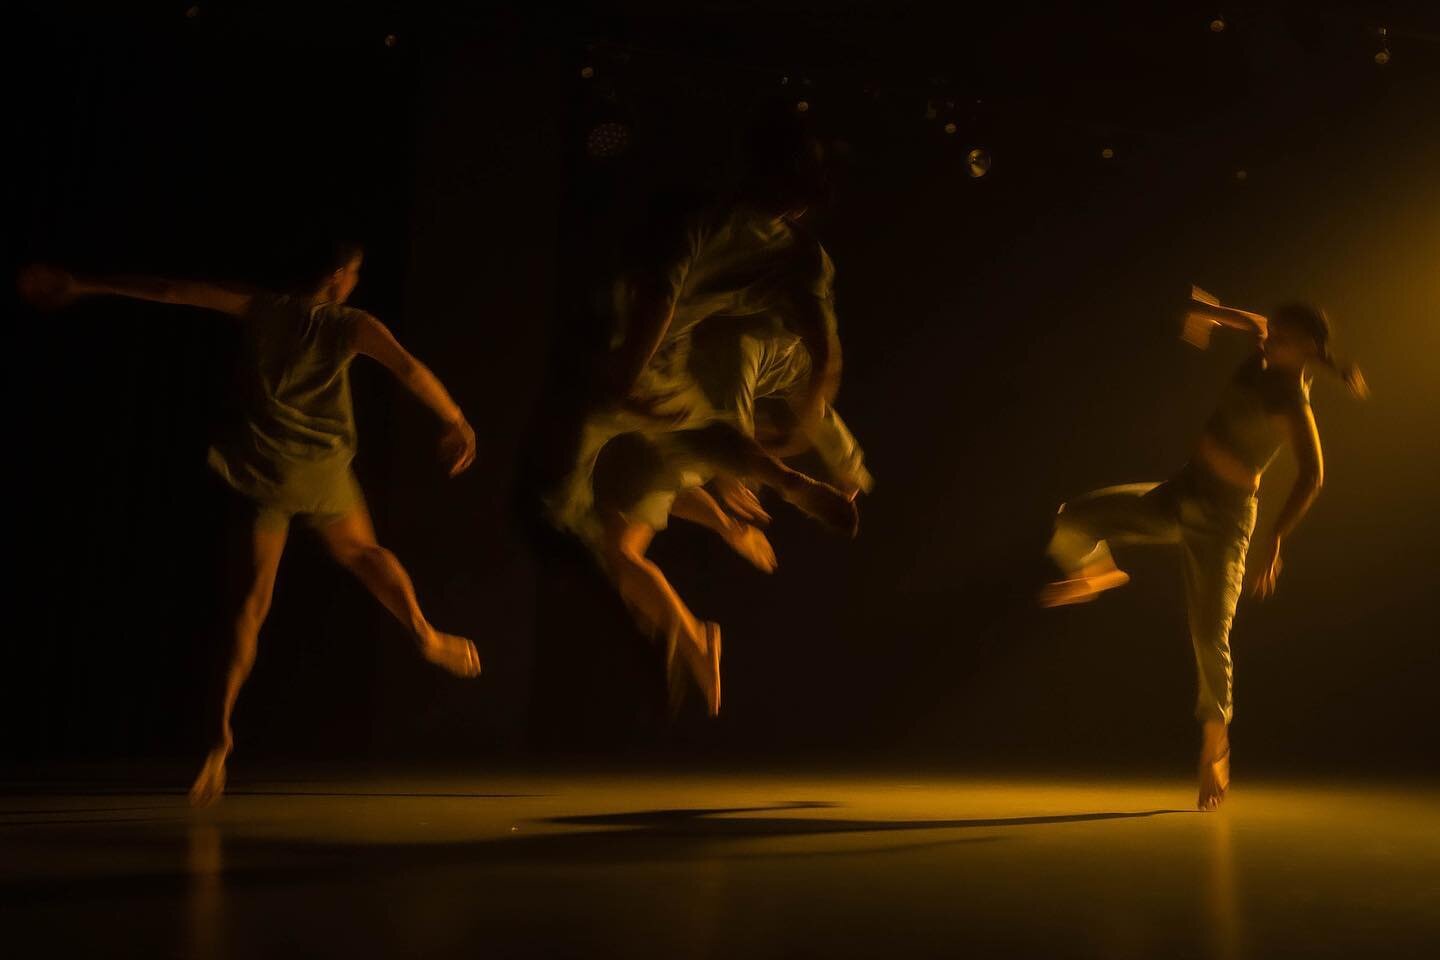 Movements.

The detail shots of the awesome performance by @inspyro_moves troop. 
.
.
#dance #contemporarydance #arts #inspyromoves #beauty #erwindarmali #danceperformance #dancemovement